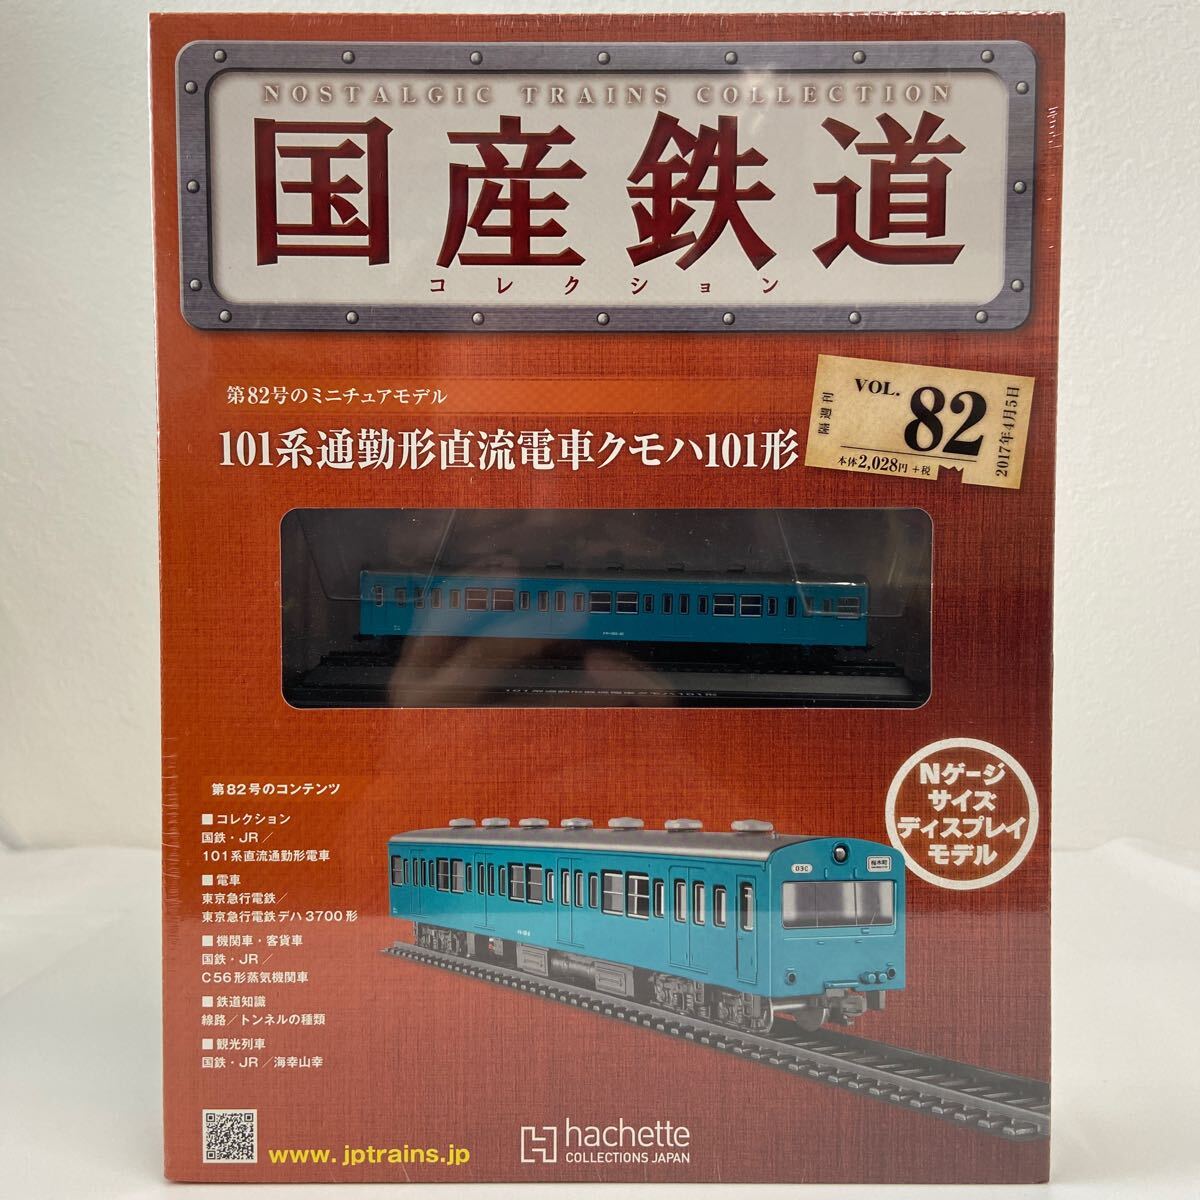 asheto domestic production railroad collection #82 101 series commuting shape direct current train kmo is N gauge size display model miniature model 